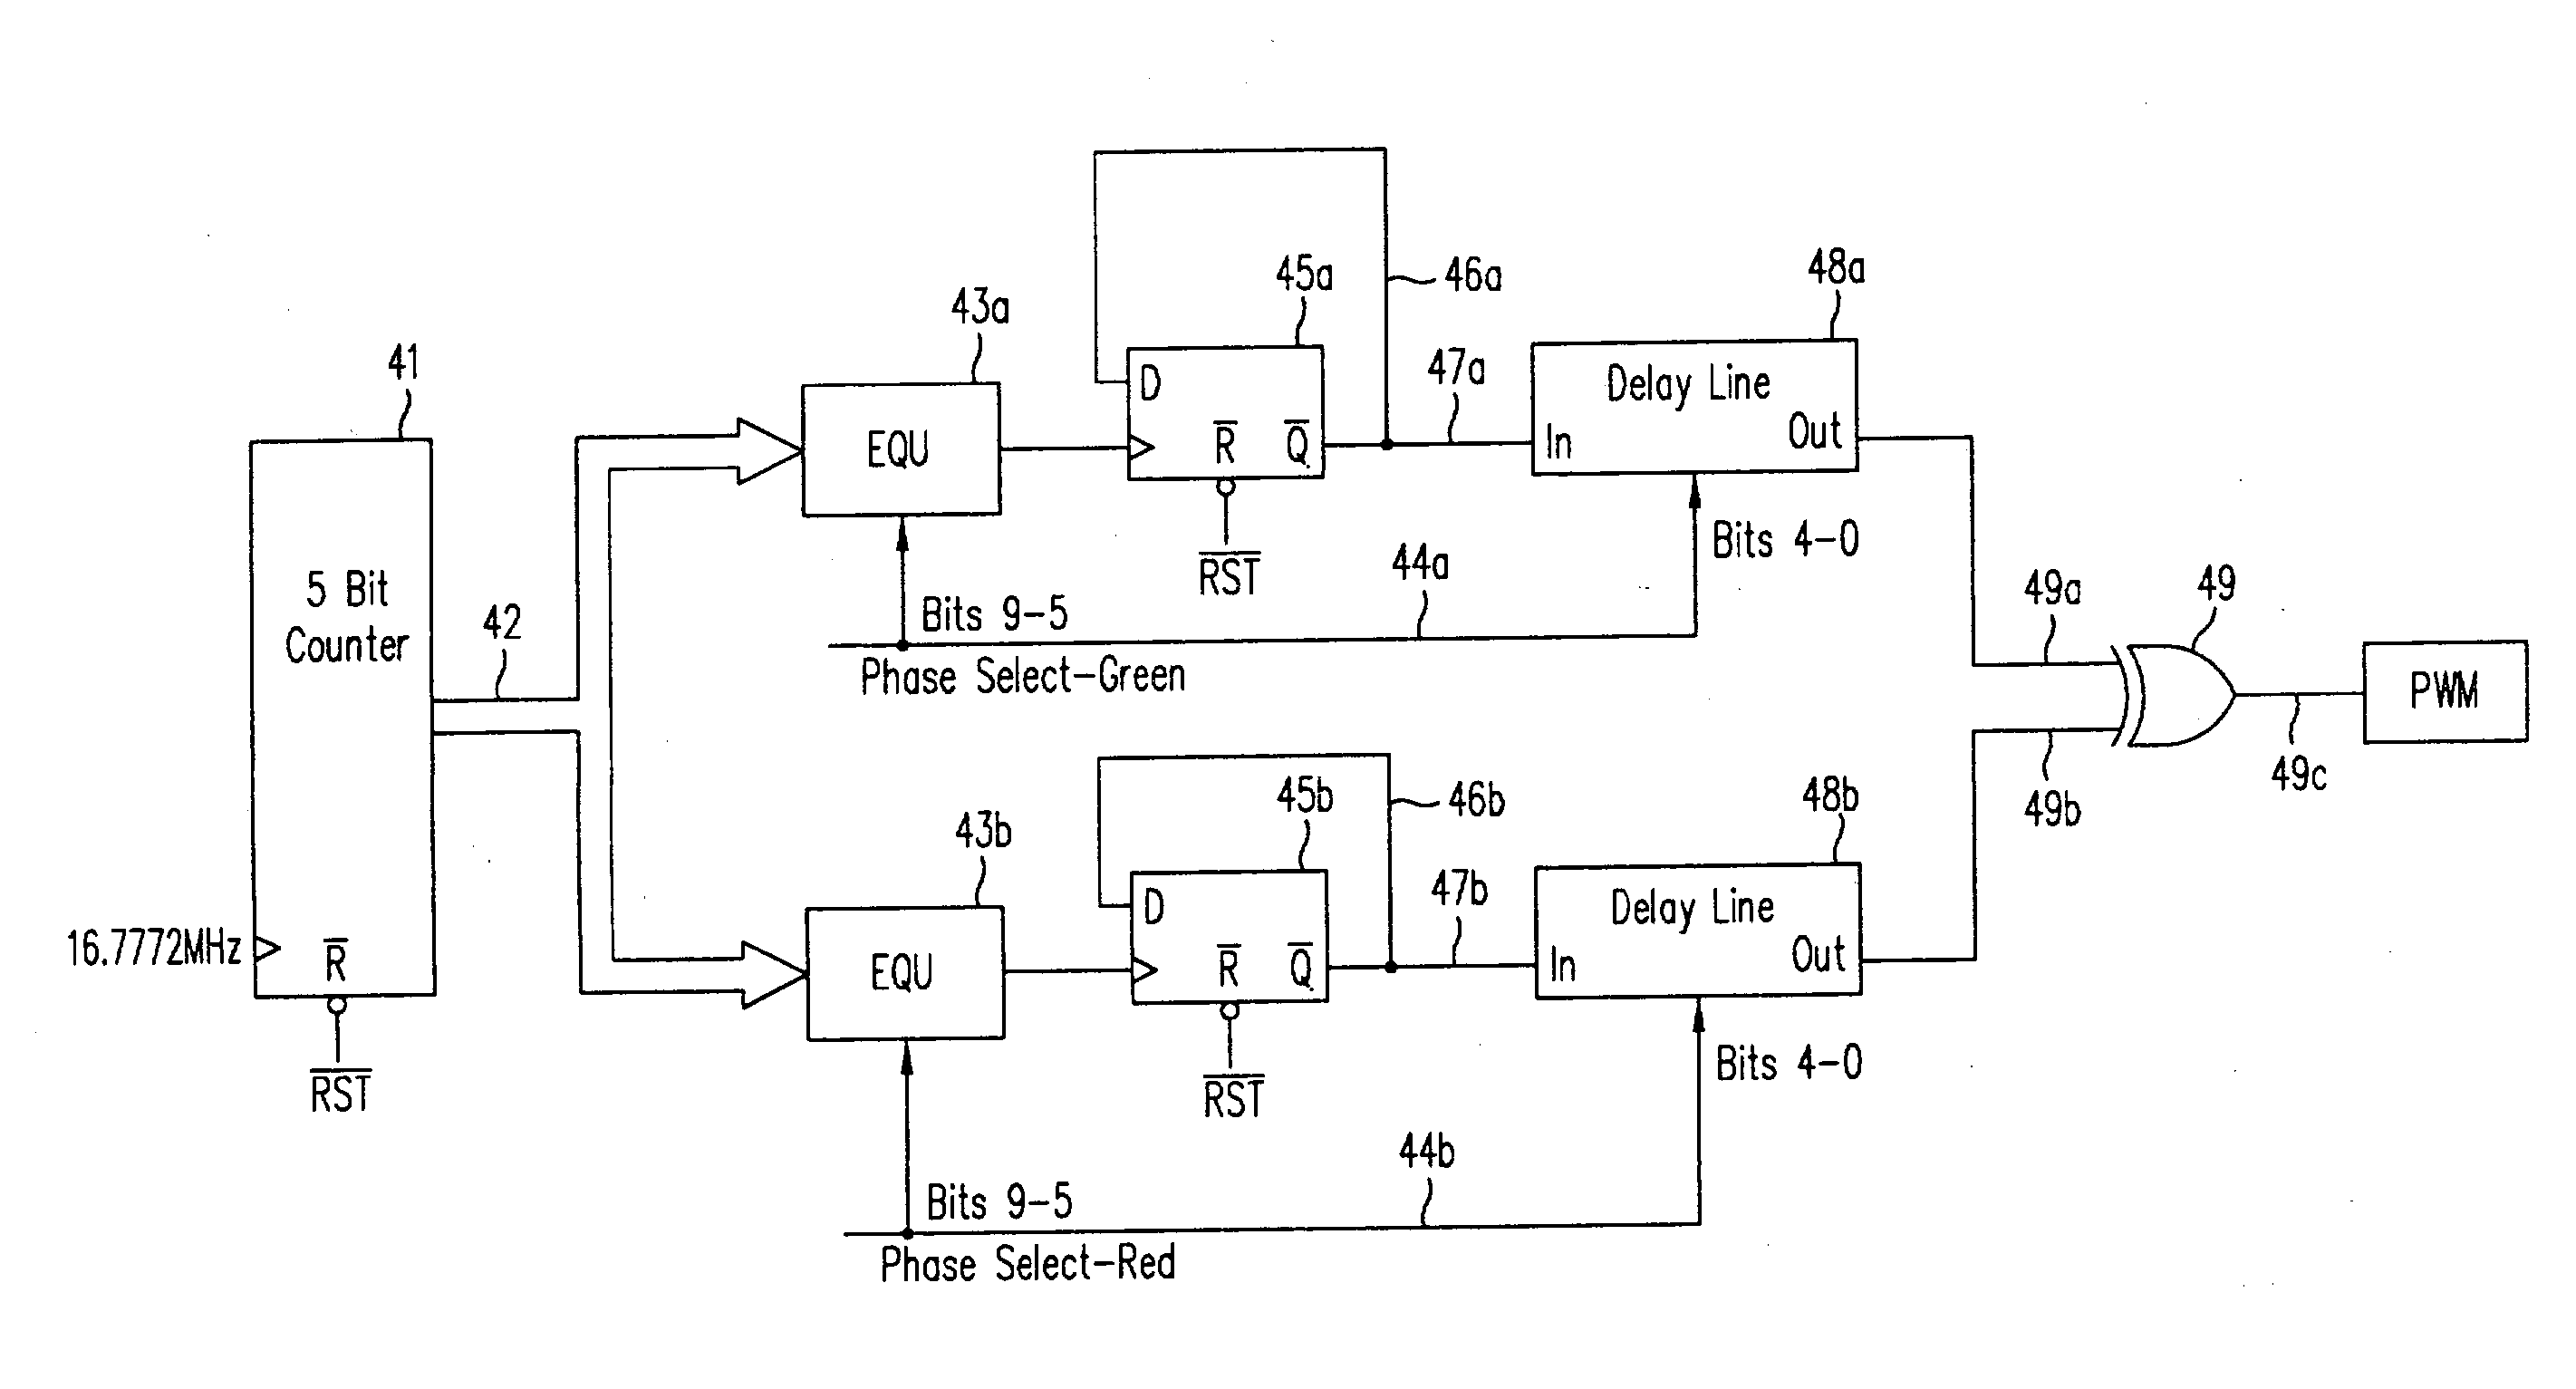 Switching power converter controller